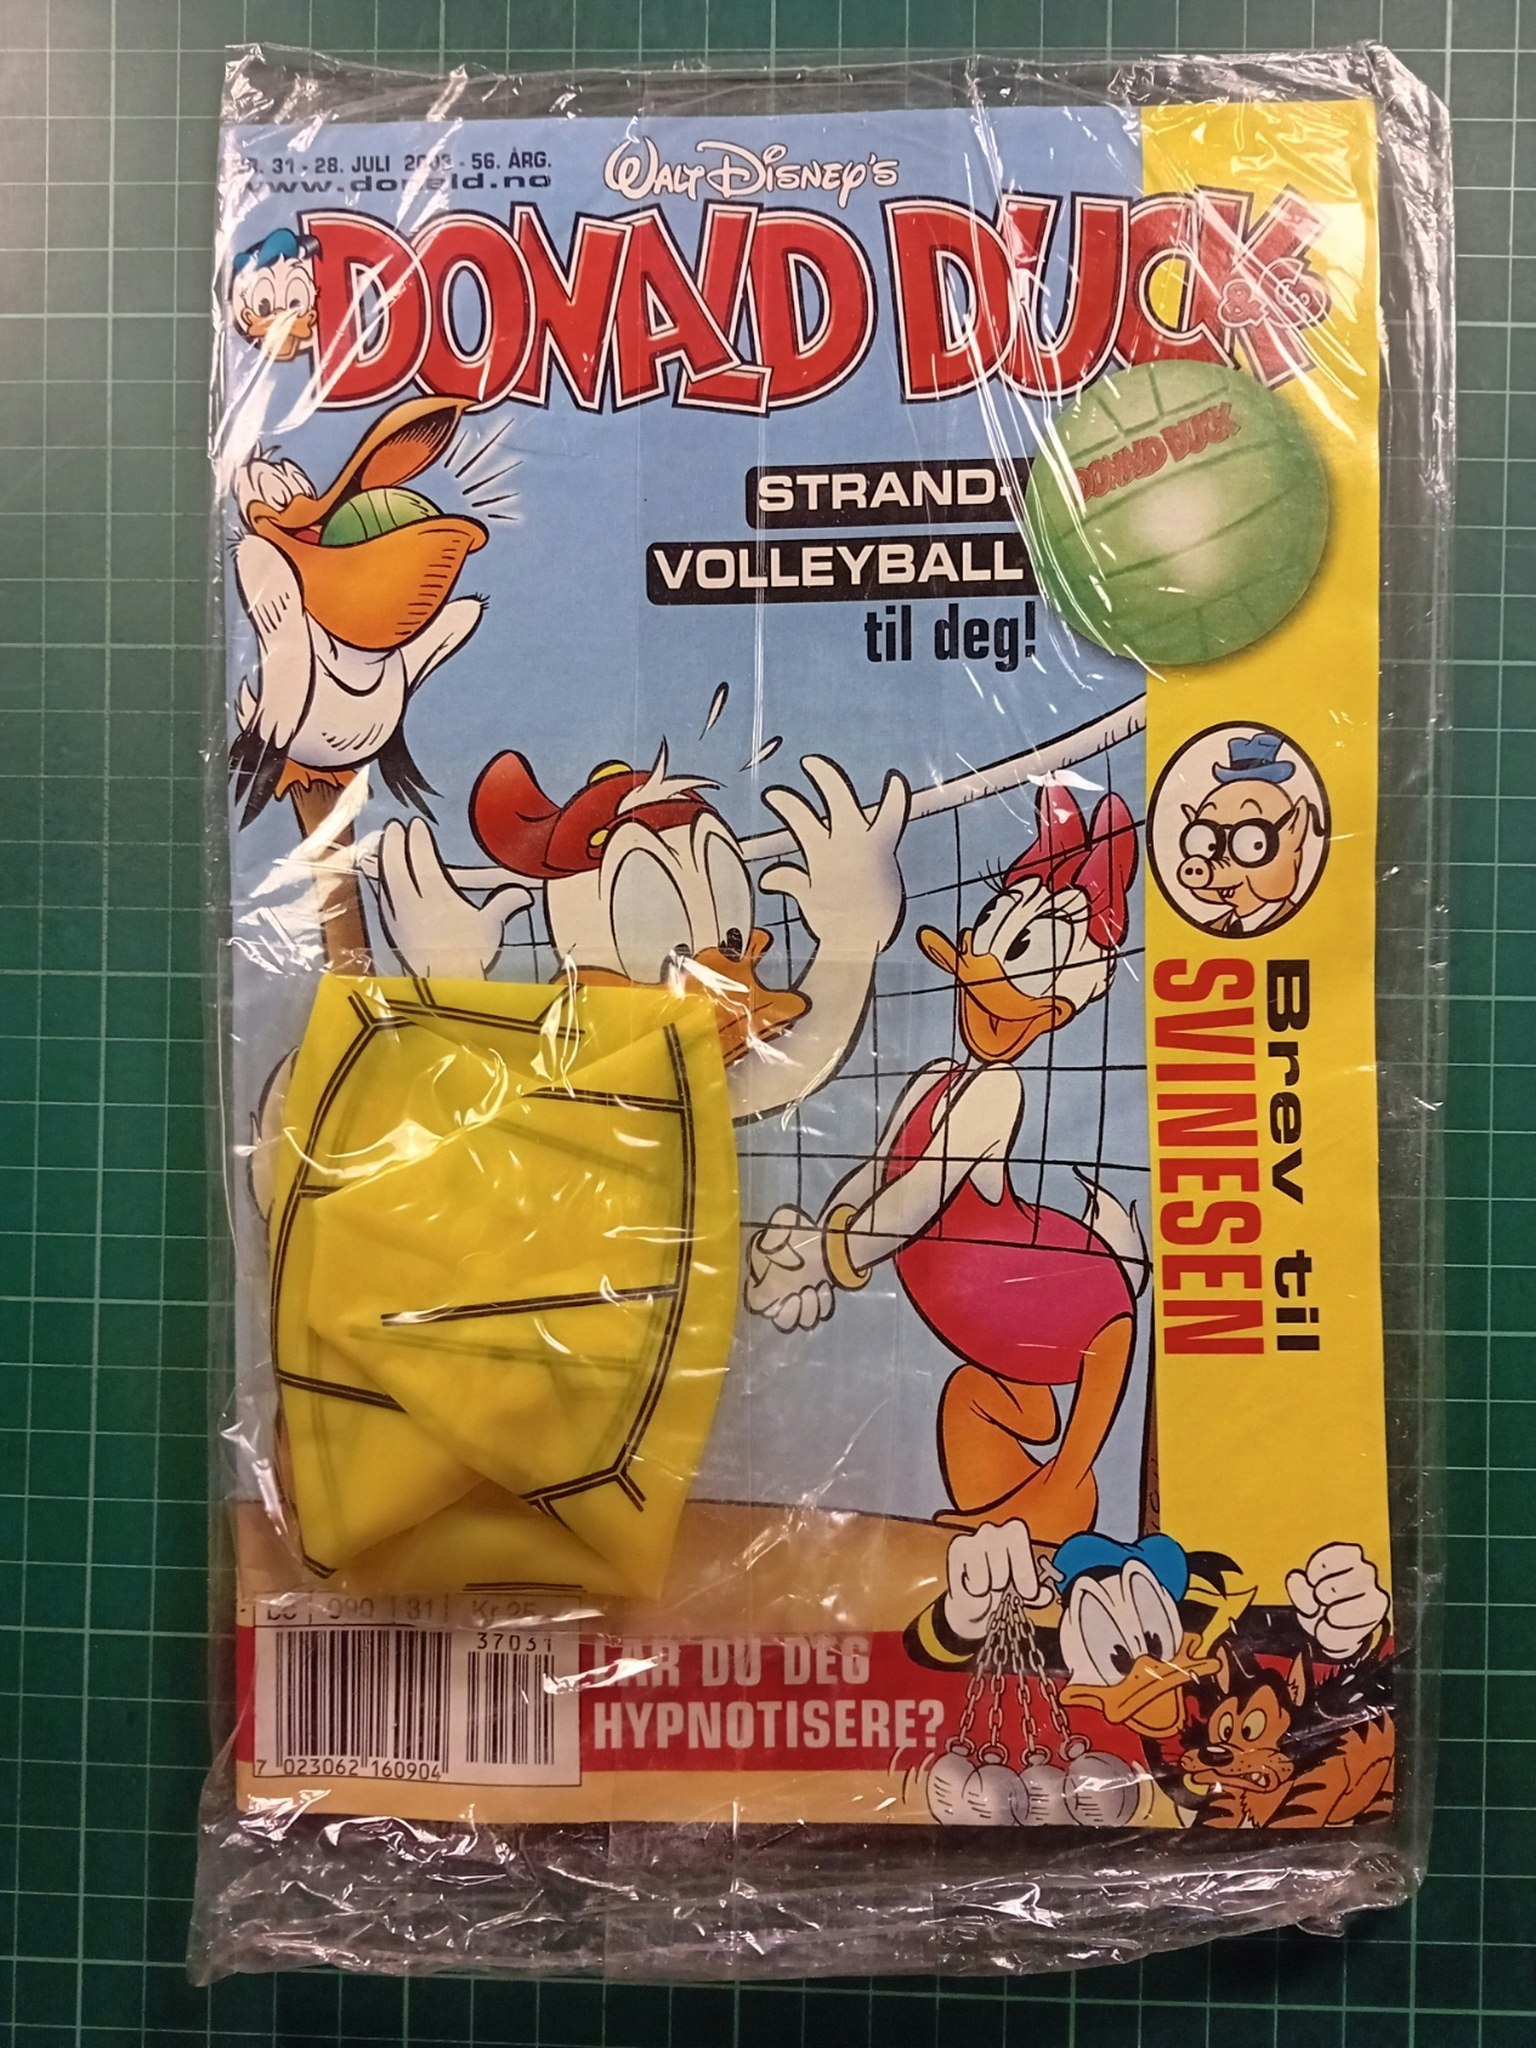 Donald Duck & Co 2003 - 31 Forseglet m/strand volleyball